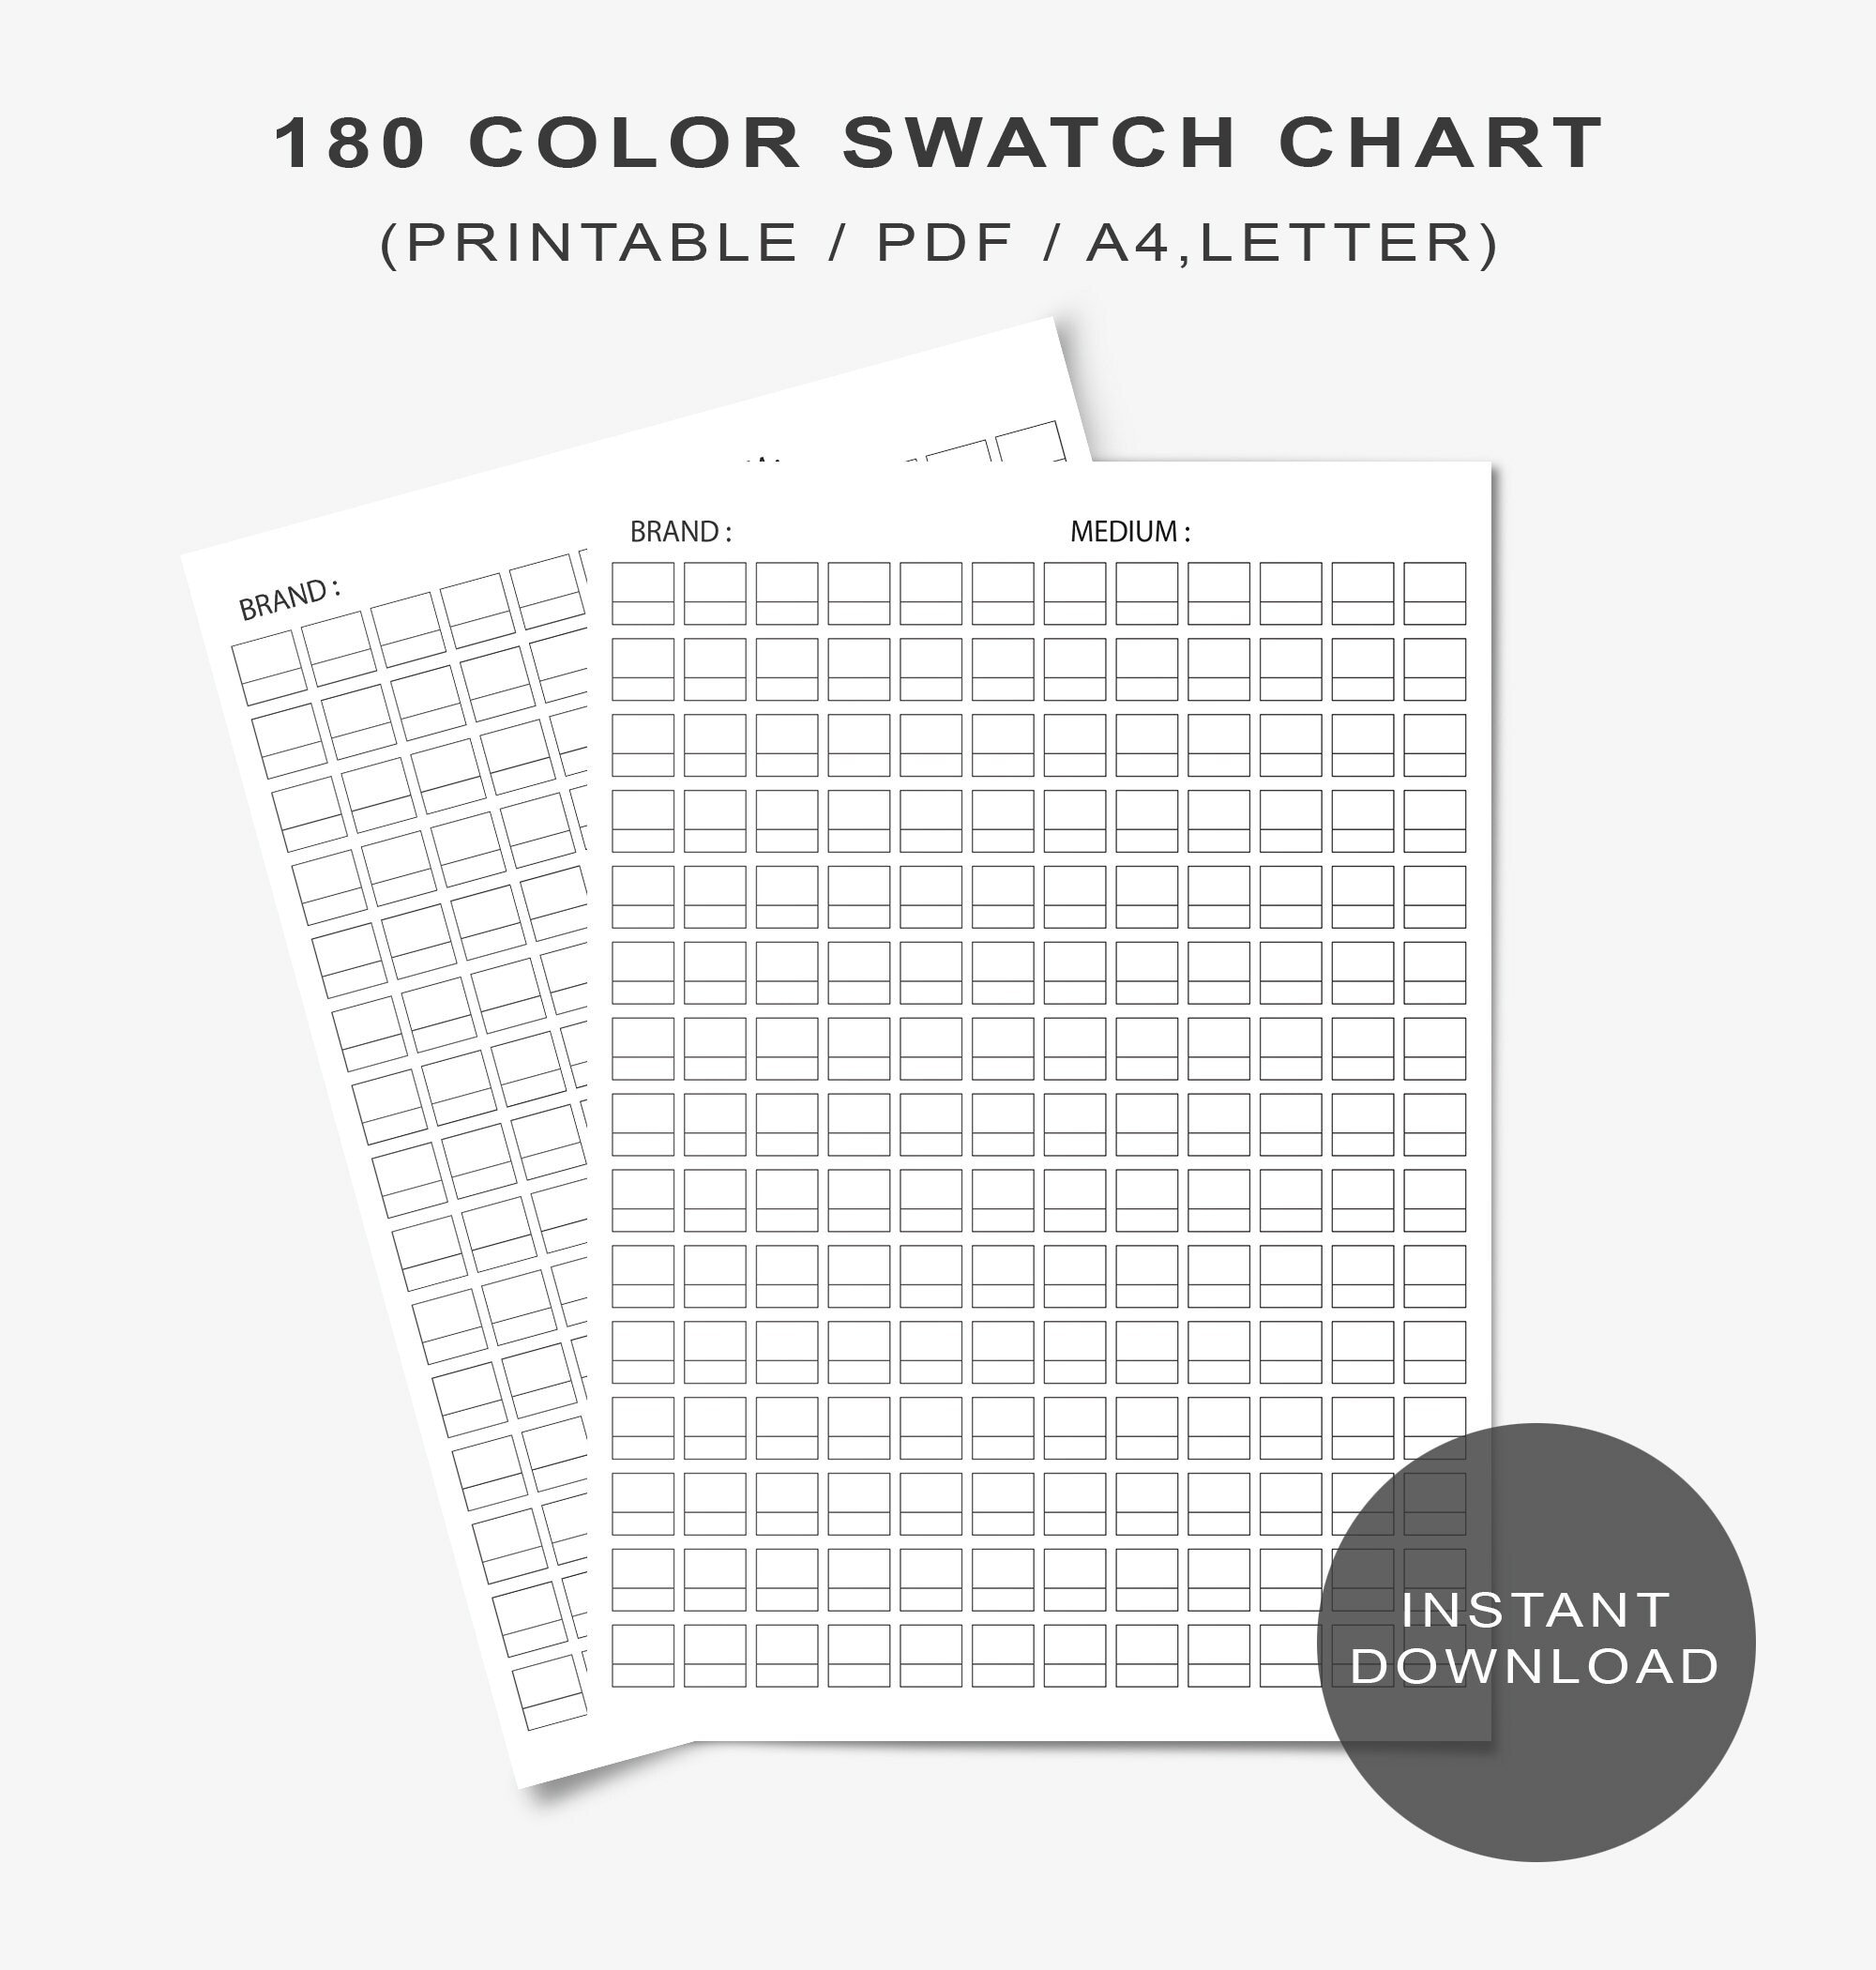 Printable Pen Test and Colour Swatch Template for Journaling